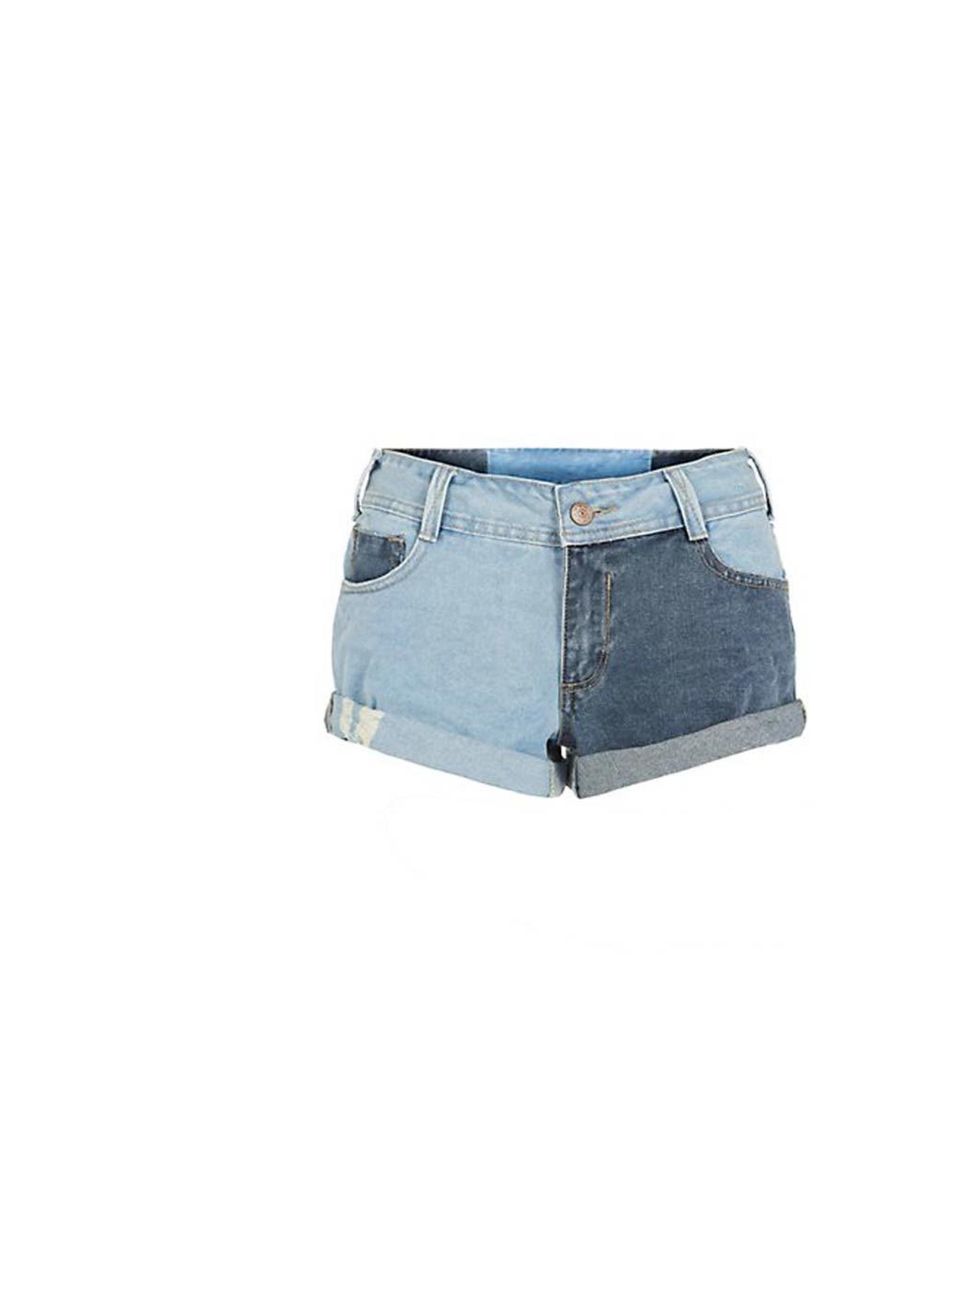 <p>Denim shorts are always a must have. Get these New Looks<a href="http://www.newlook.com/shop/womens/trousers-and-shorts/blue-colour-block-turn-up-demim-shorts-_296393245"> Colour Block Turn Ups</a>, £19.99, for a spin on the classic.</p>